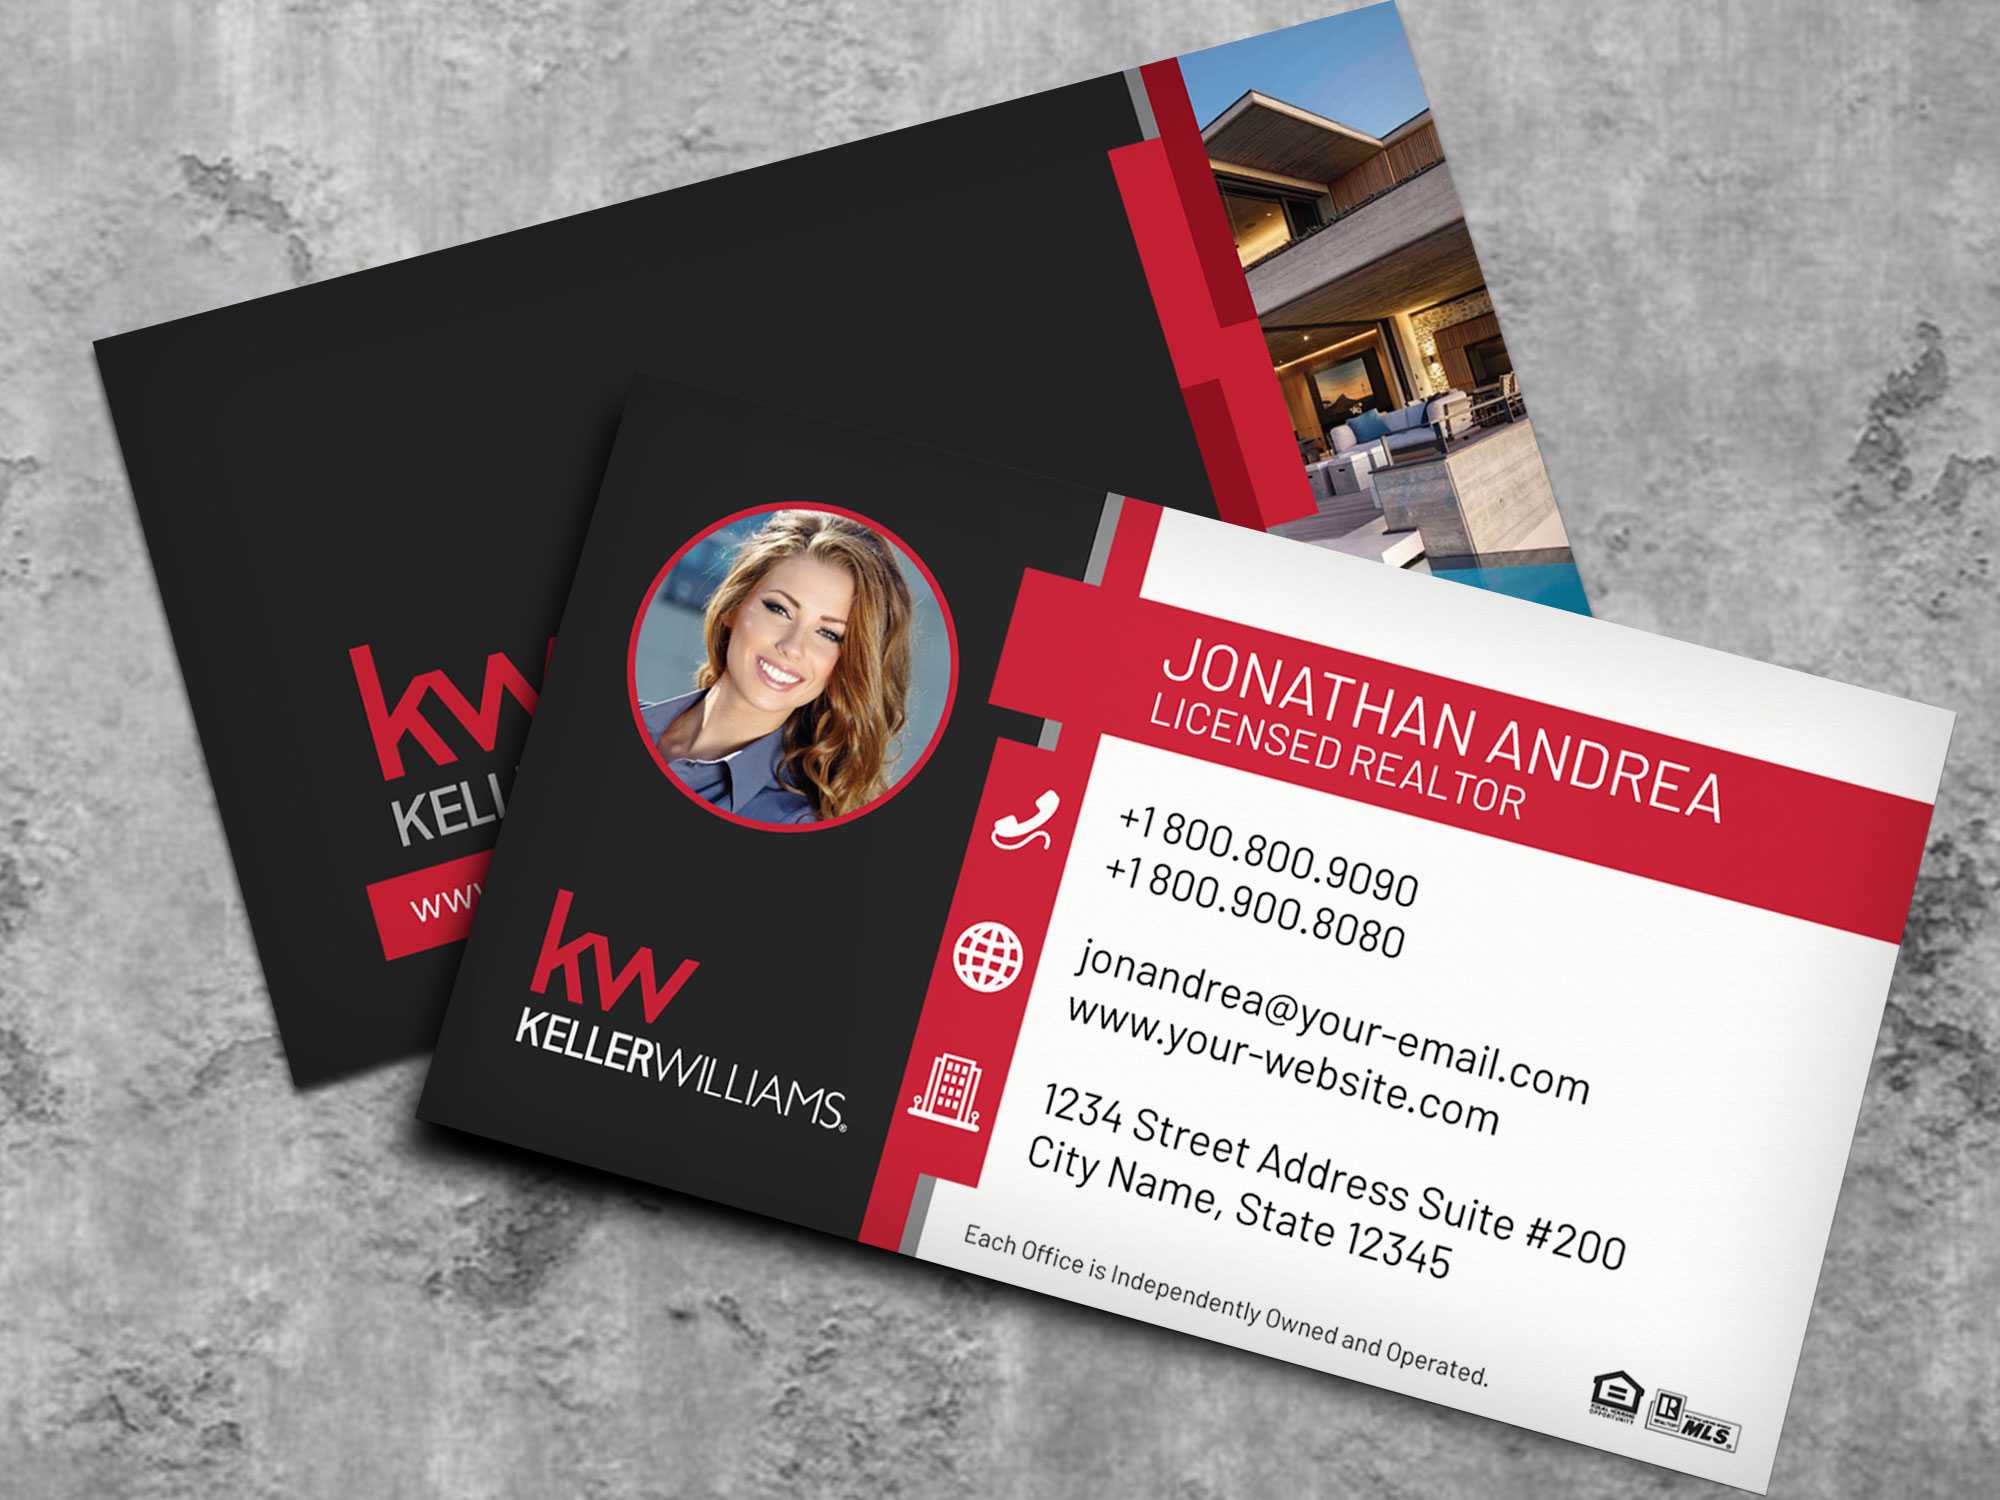 Keller Williams Business Card Template Bc19702Kw – Nusacreative Throughout Keller Williams Business Card Templates